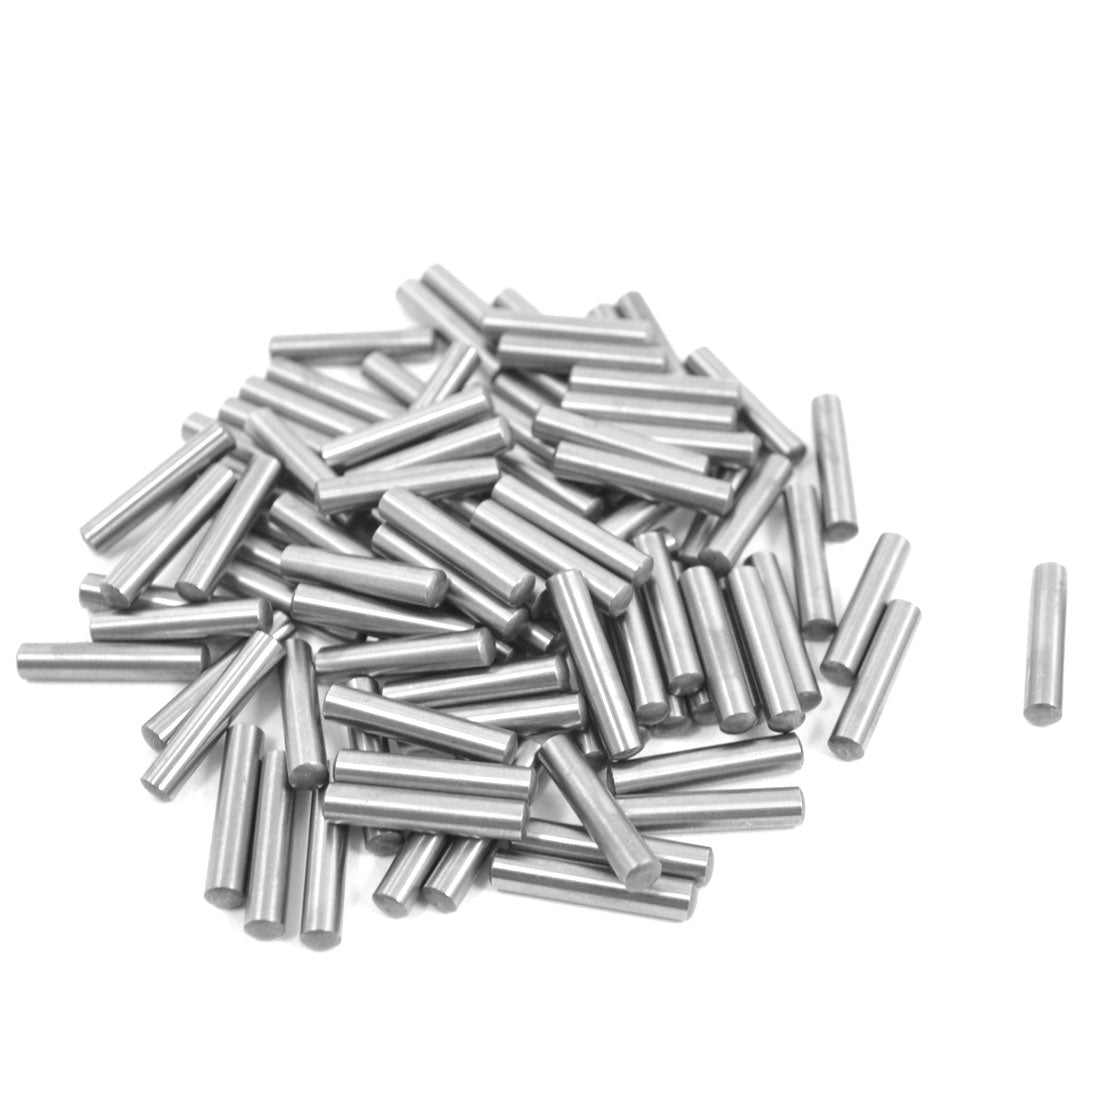 uxcell Uxcell 100 Pcs Stainless Steel 3.1mm x 15.8mm Parallel Dowel Pins Fasten